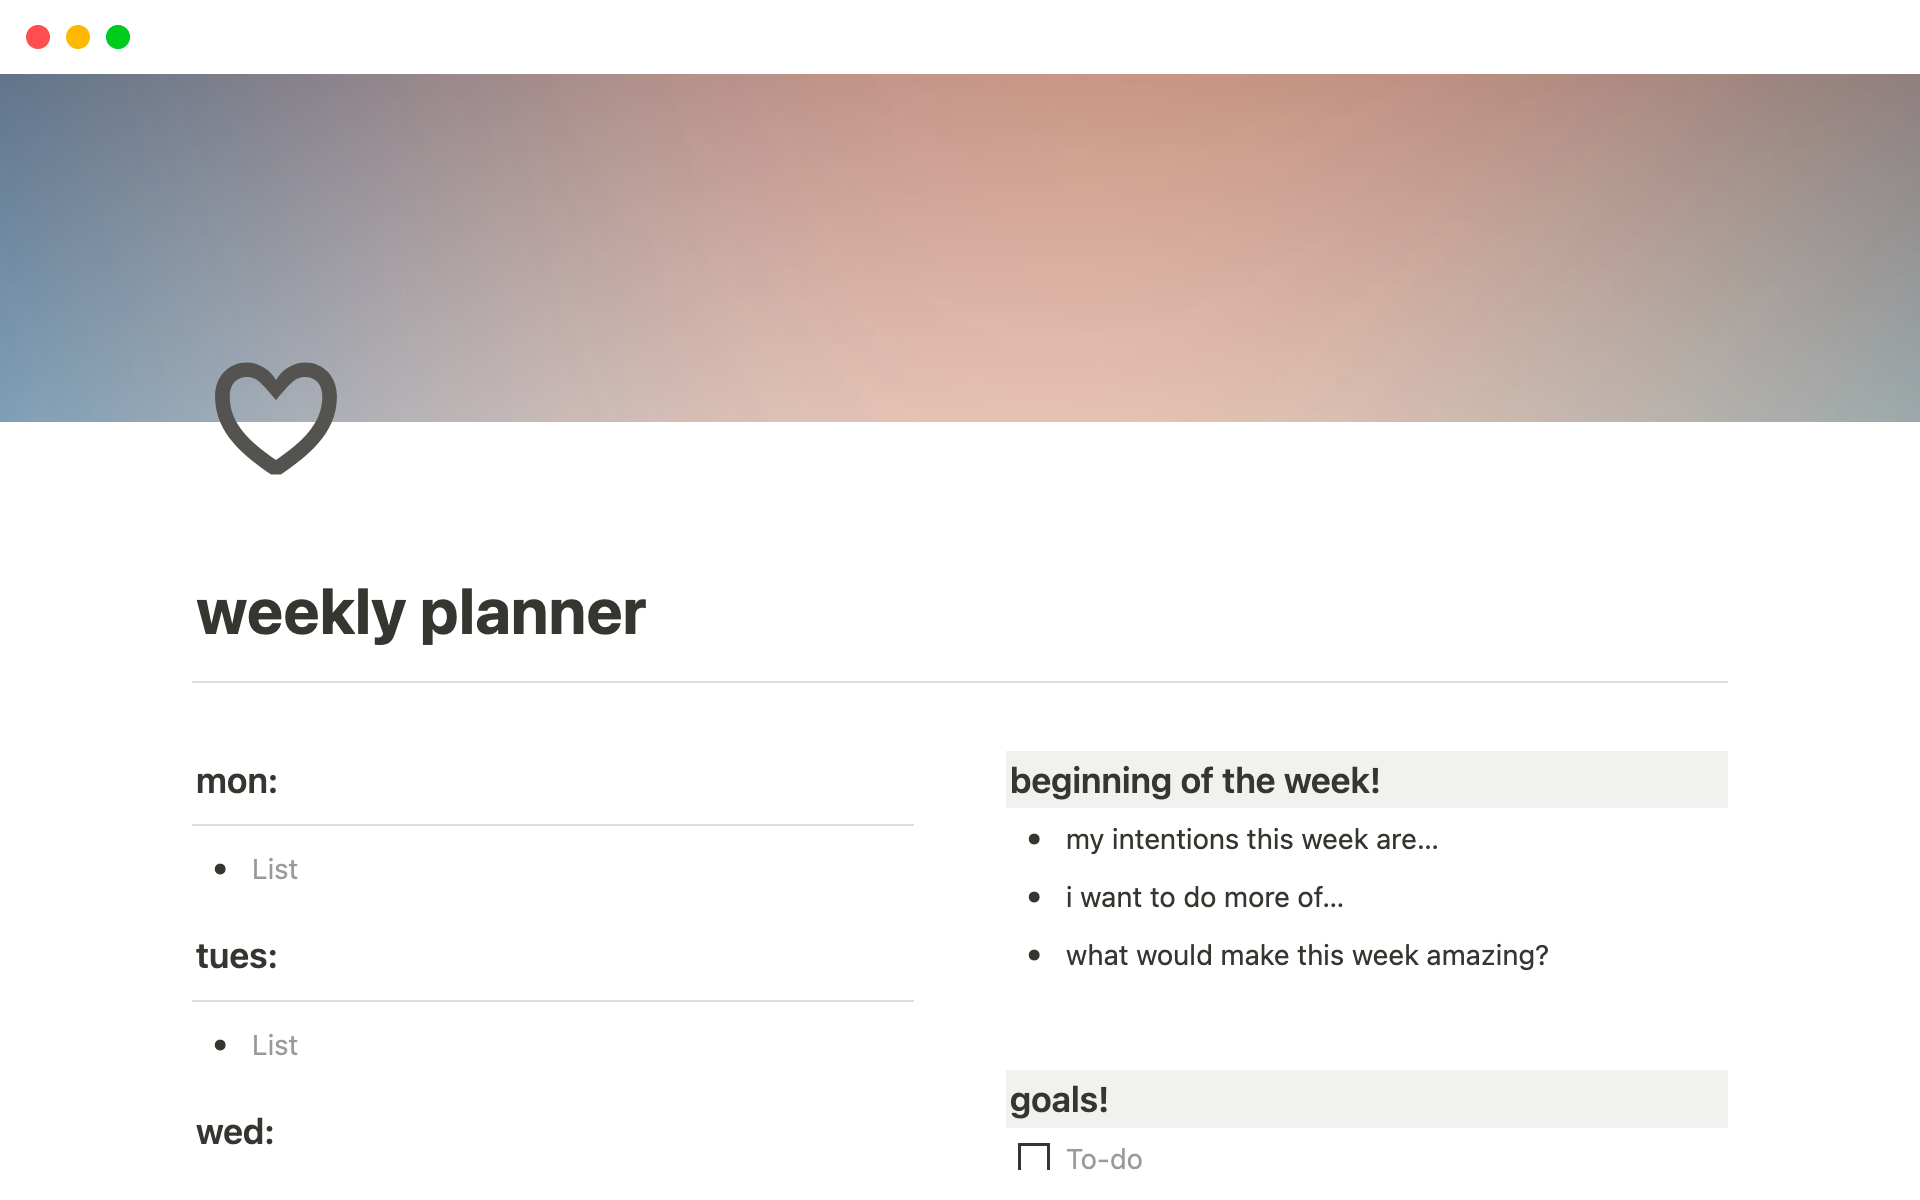 This template is a weekly planner that features goals, a to-do list, and journal prompts for the start and end of the week!